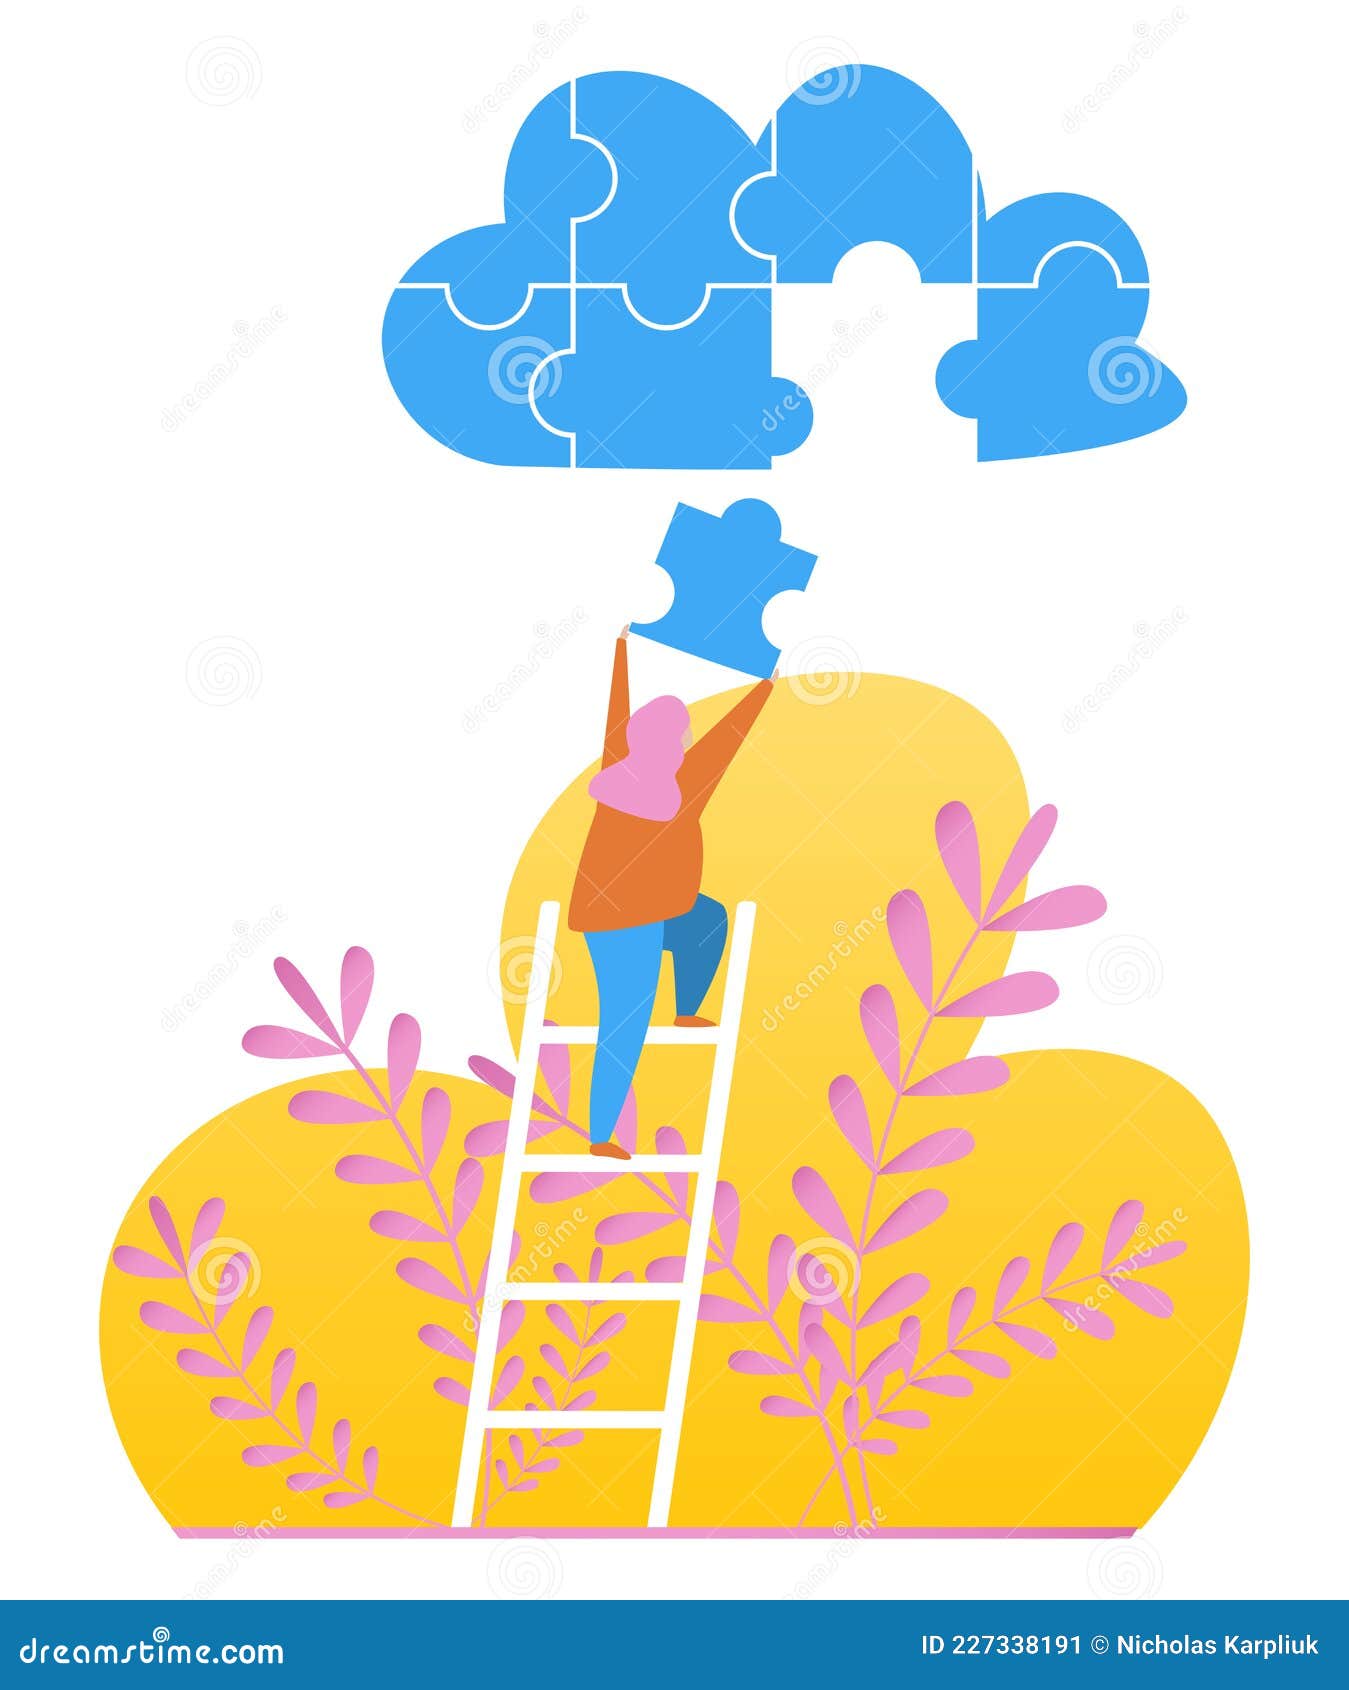  image. the girl on the stairs. putting together a cloud puzzle. business concept